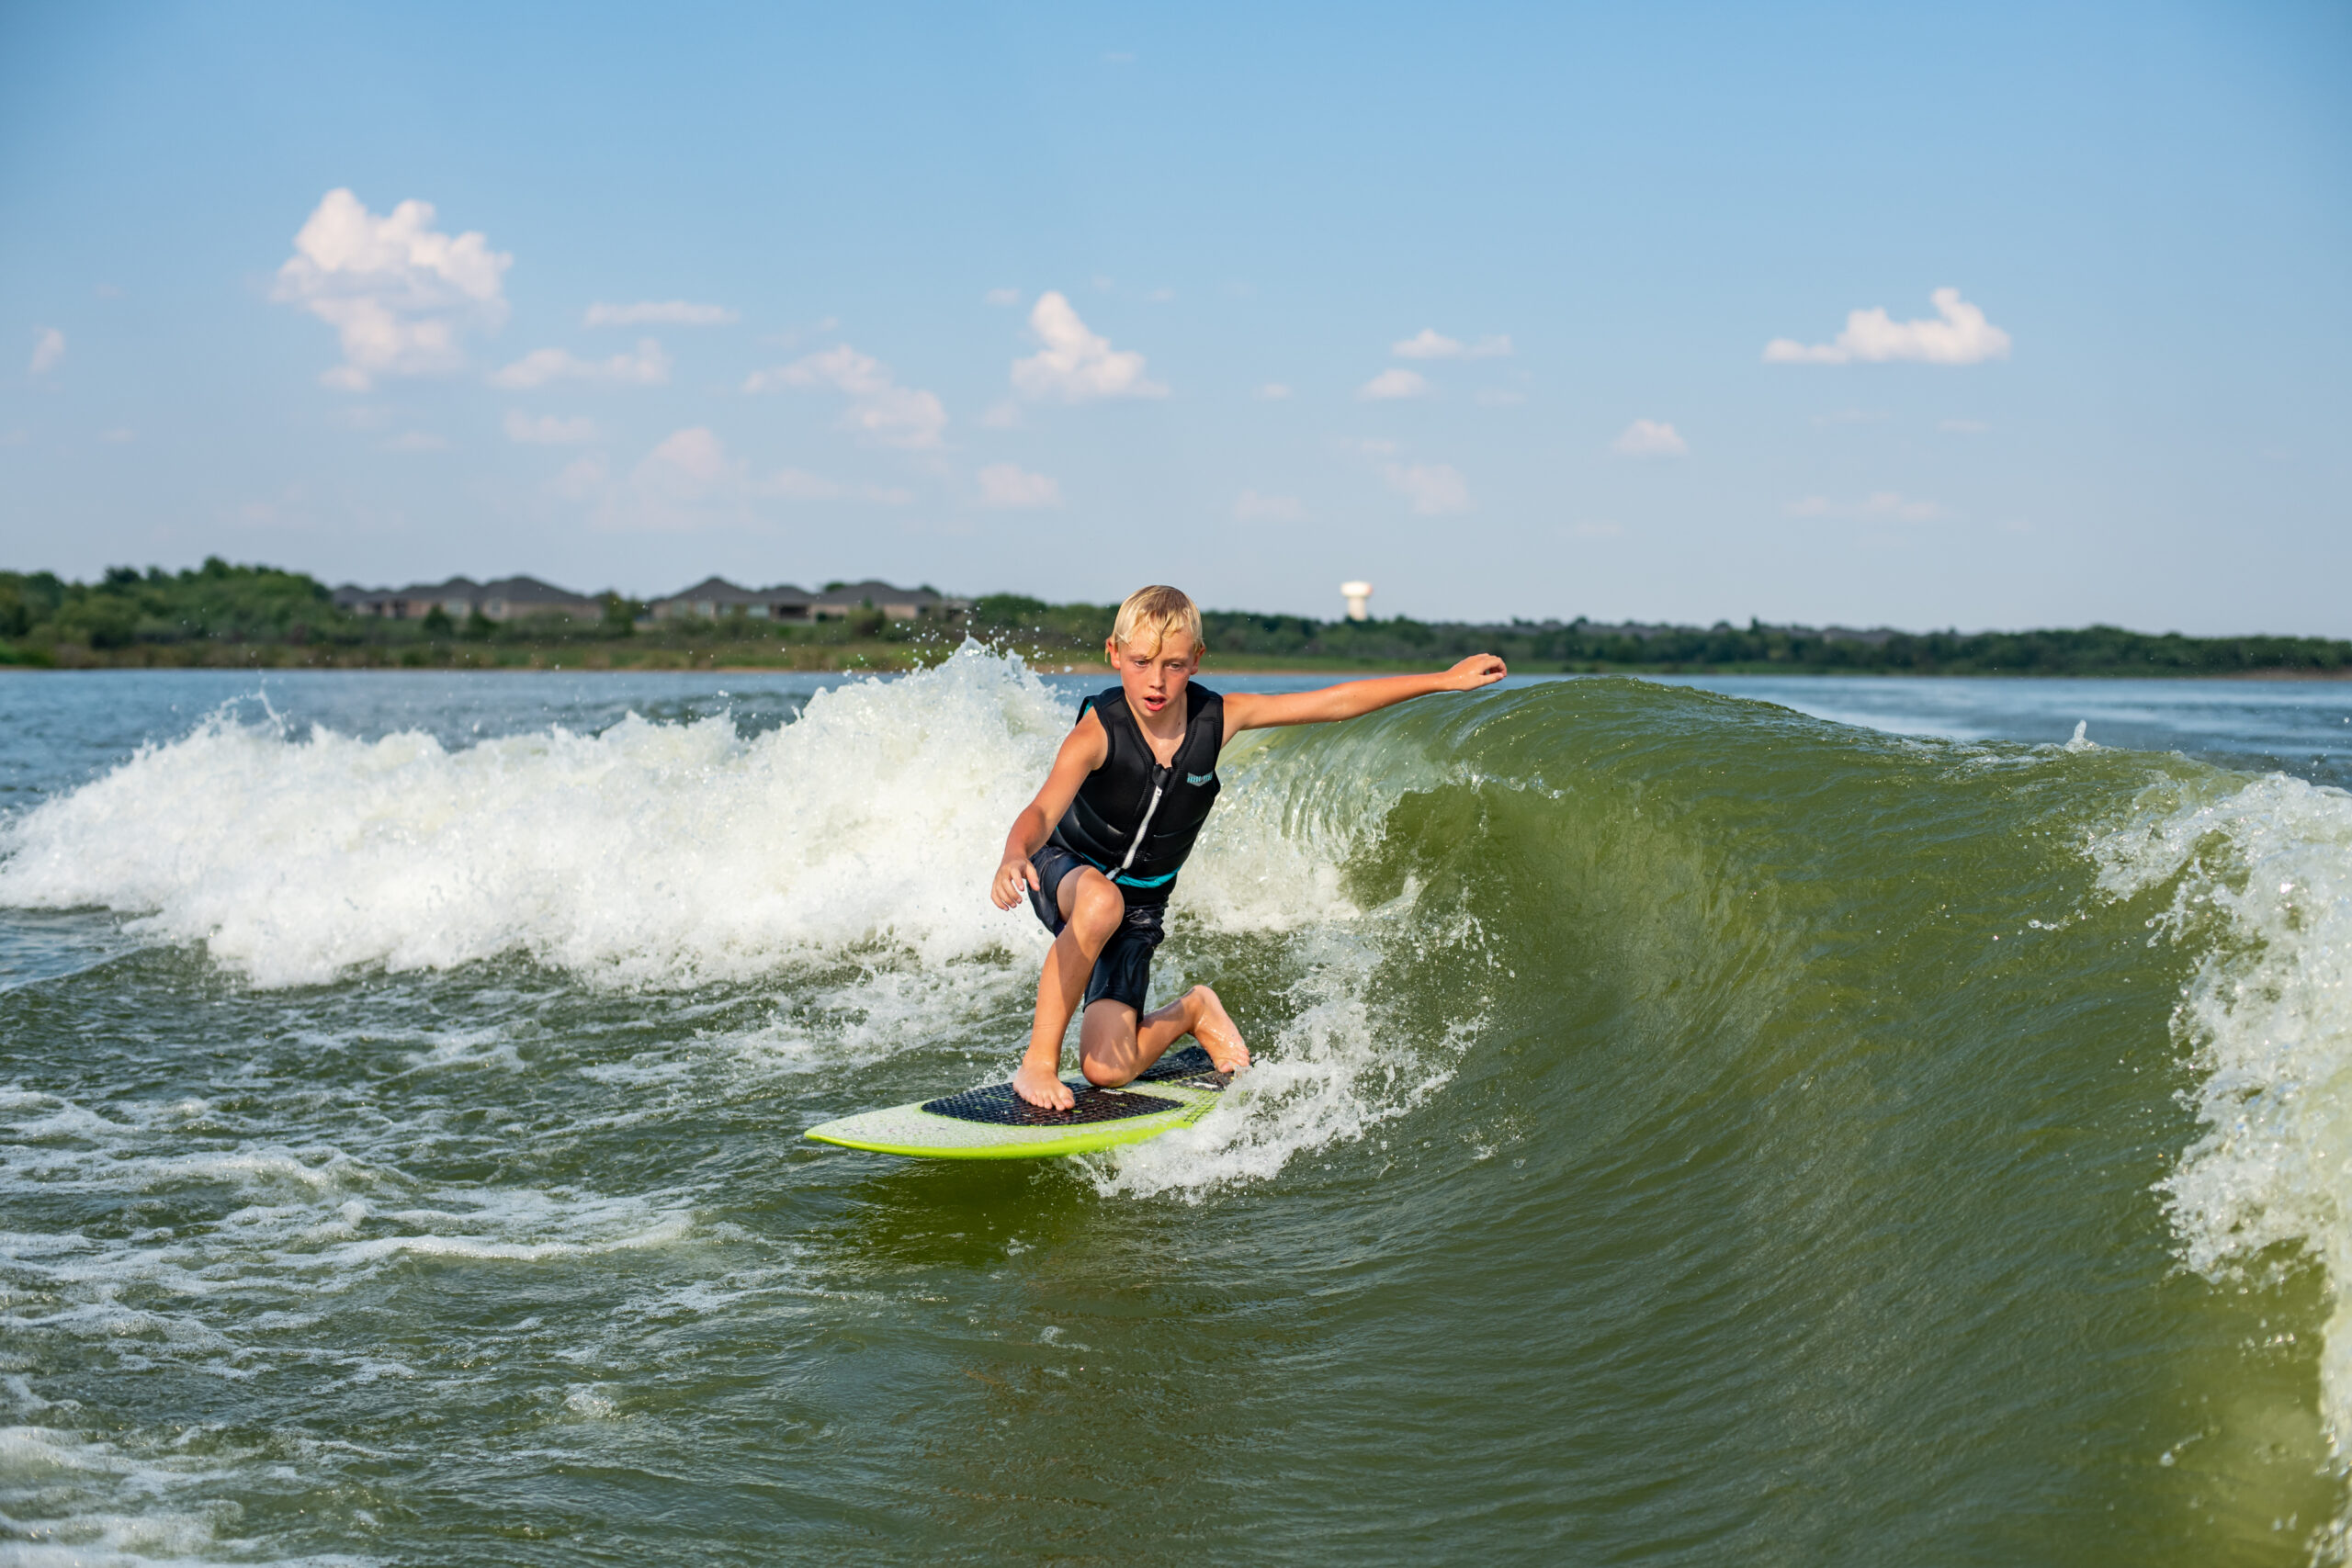 Learn to wakesurf with the DFW Surf School